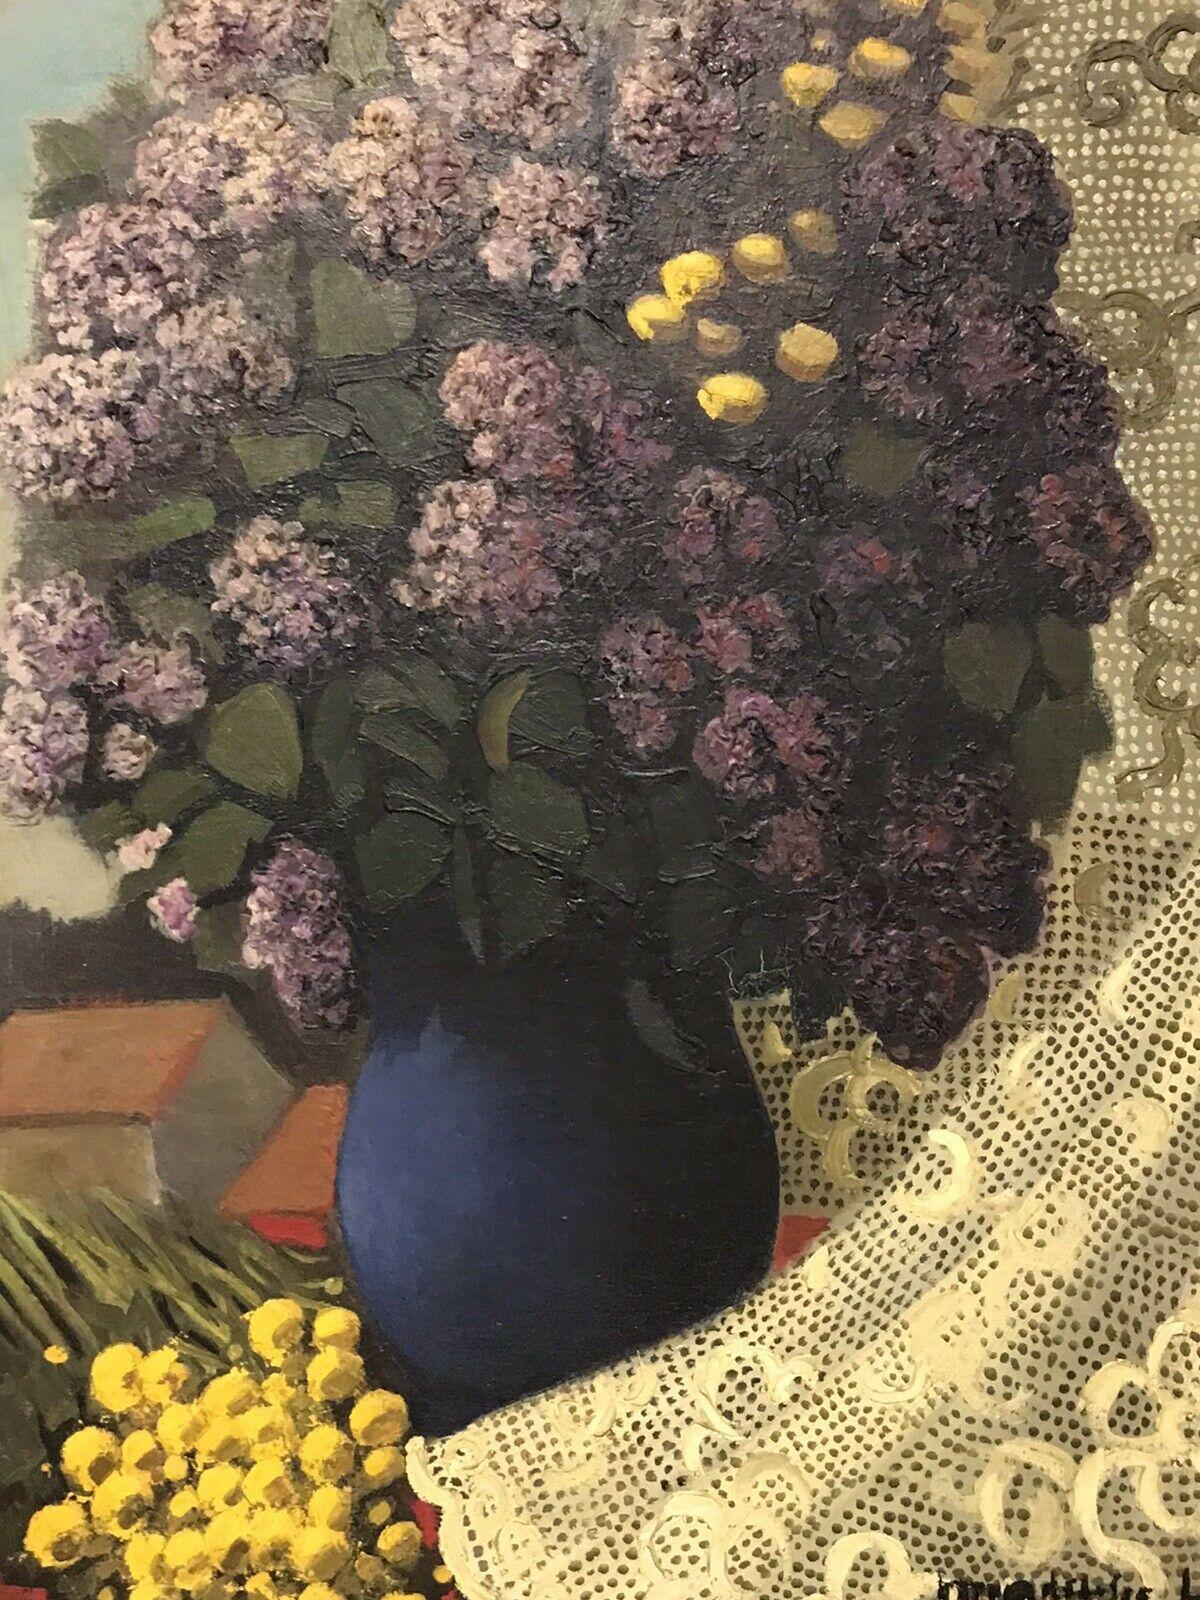 Artist/ School: French School, signed lower right, labelled verso

Title: Lilac Flowers, titled to label verso

Medium: oil painting on canvas, framed

Size:  frame:     33 x 29 inches
         painting:  25.5 x 21 inches

Provenance: private